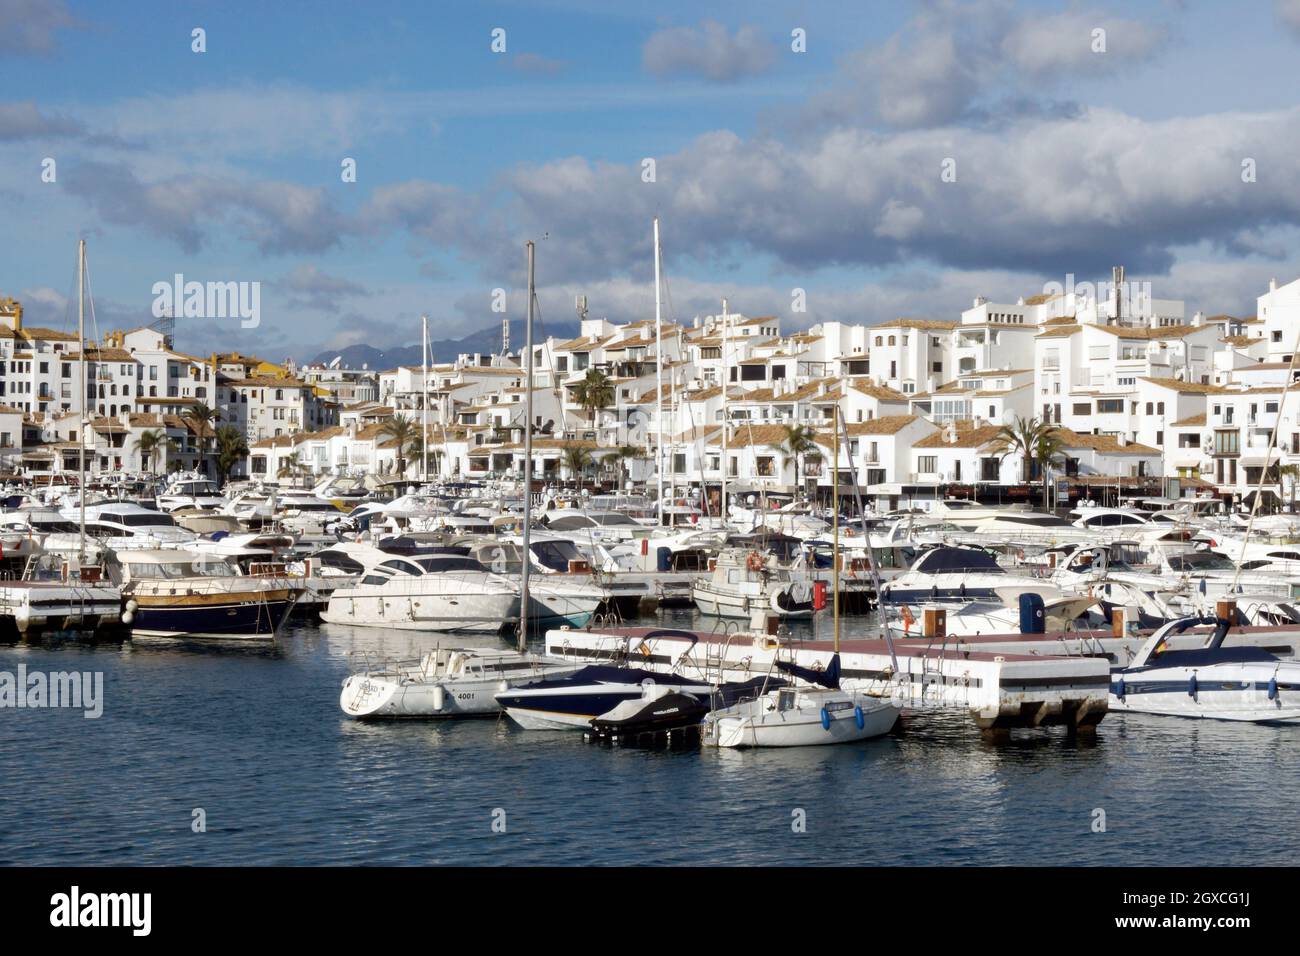 Puerto Banús: more than just a glamourous marina